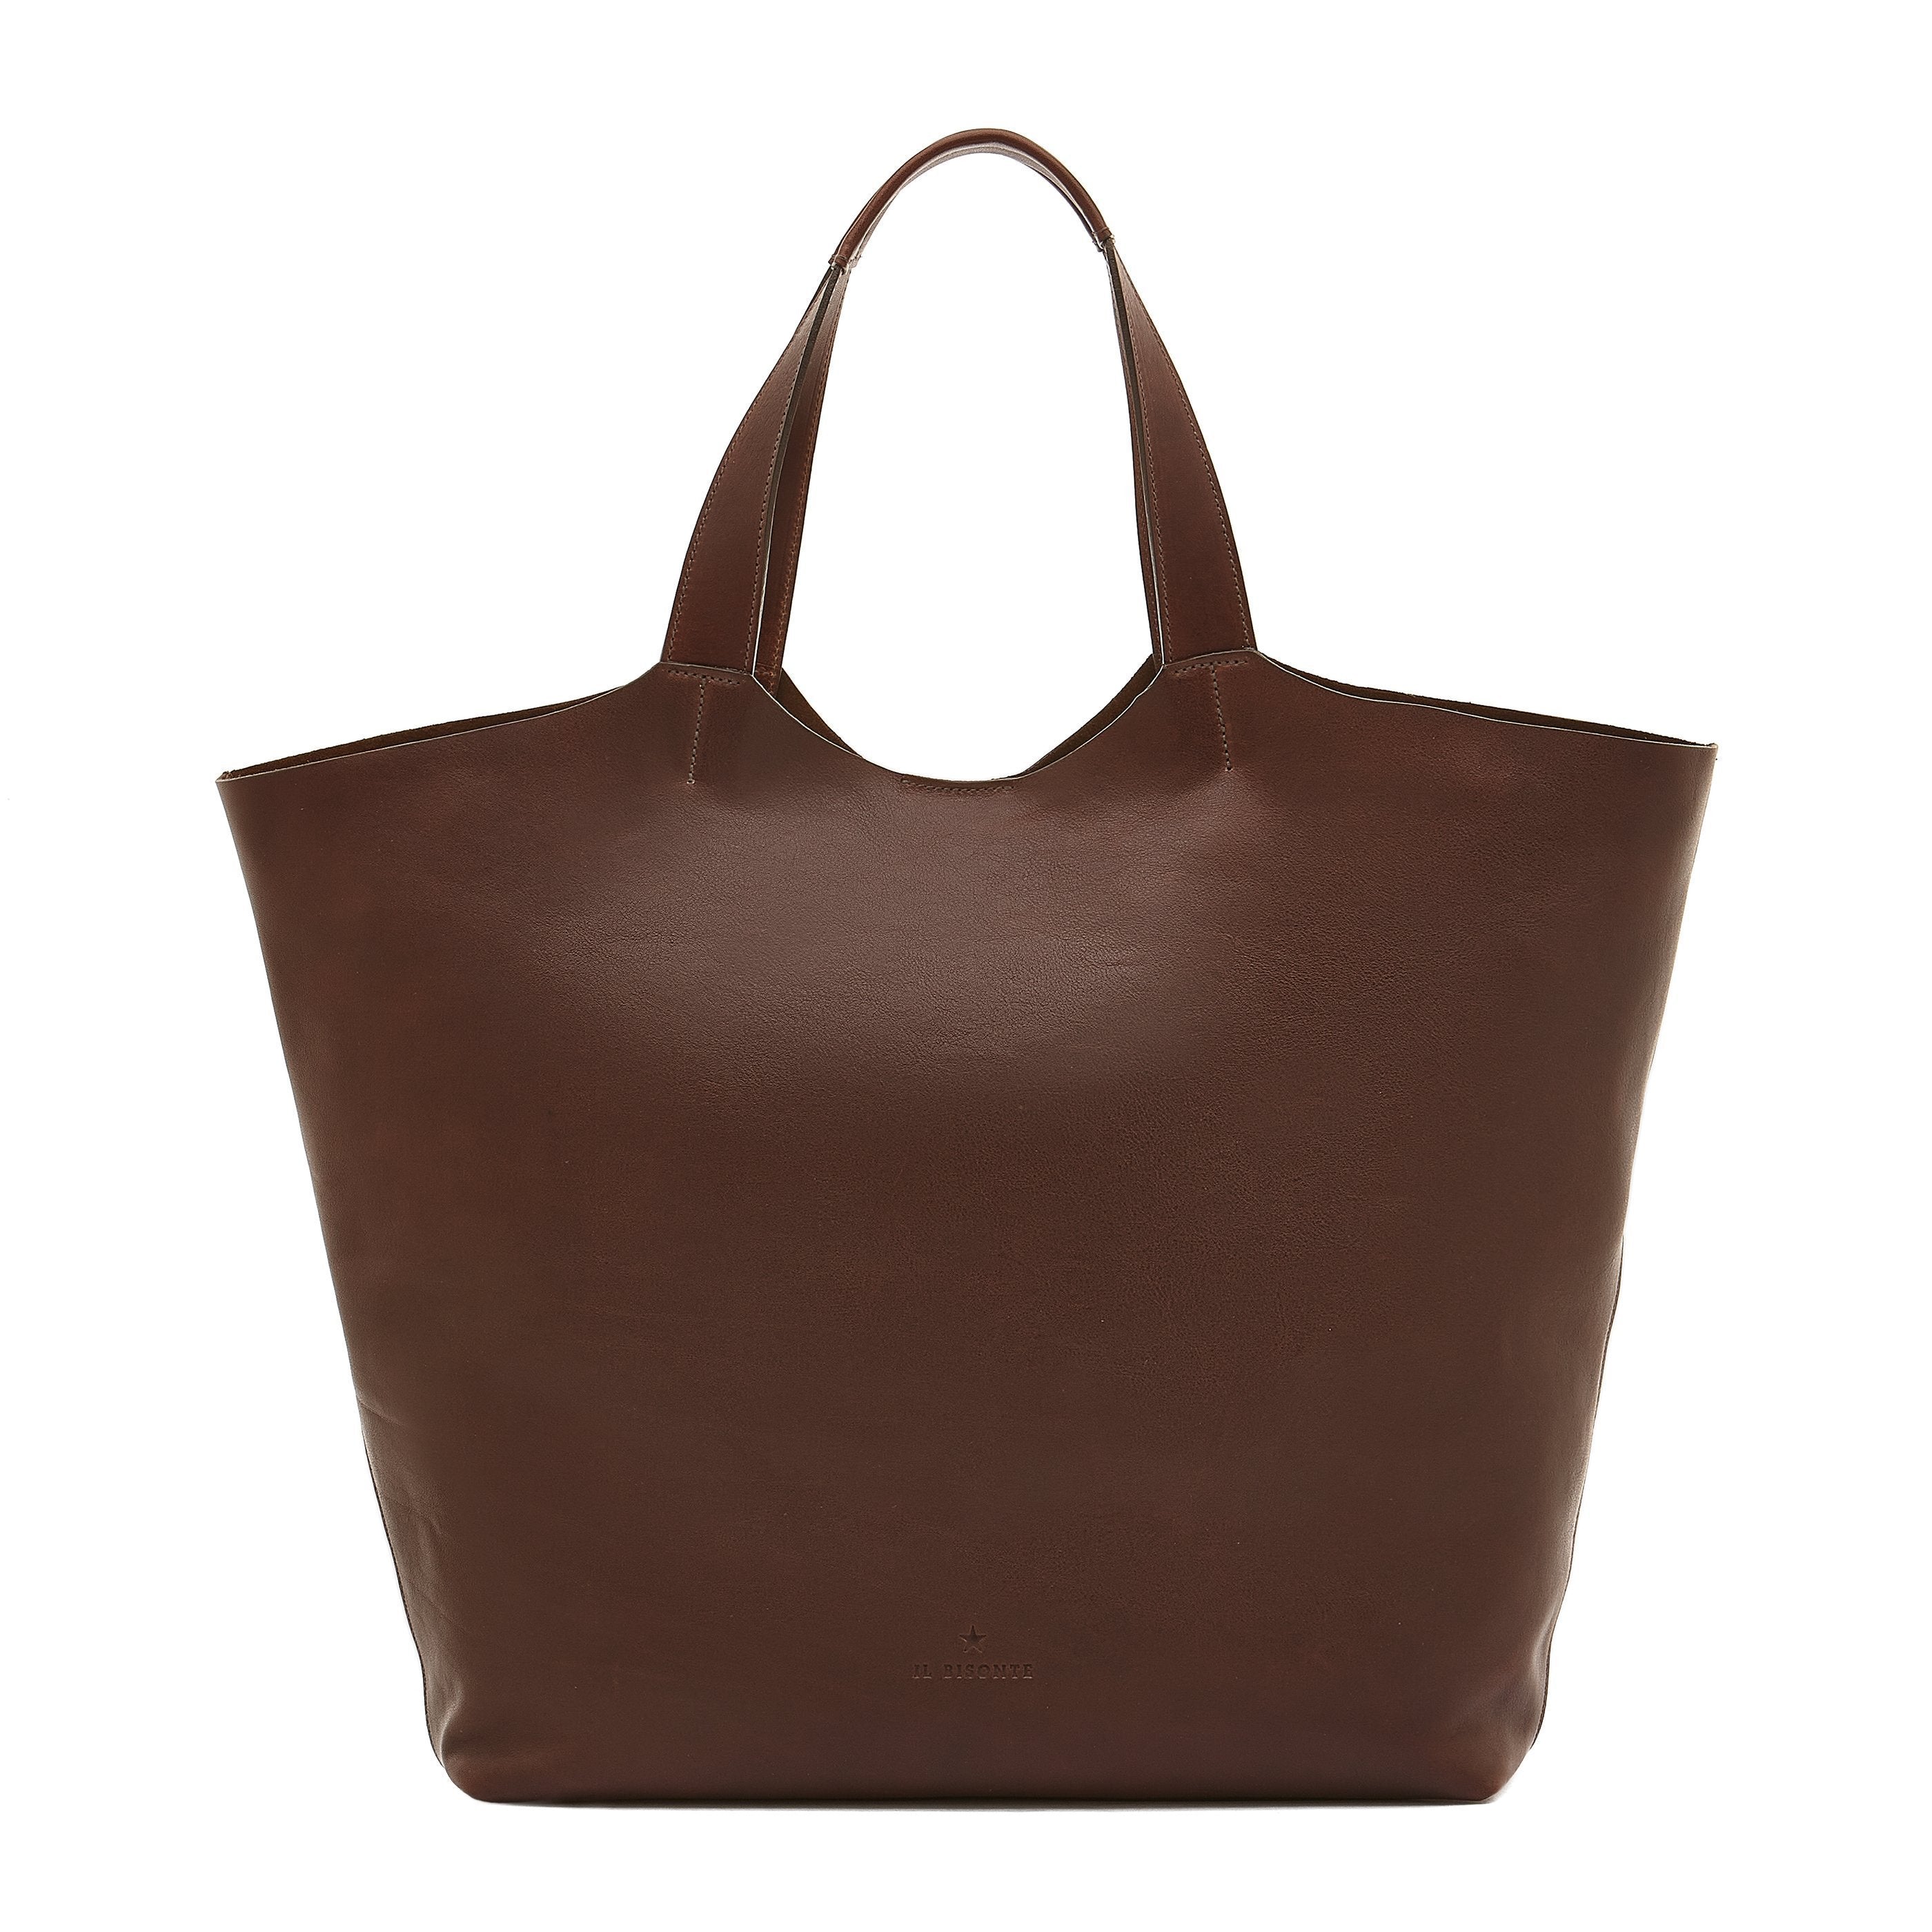 Le Laudi | Women's Tote Bag in Vintage Leather color Coffee – Il